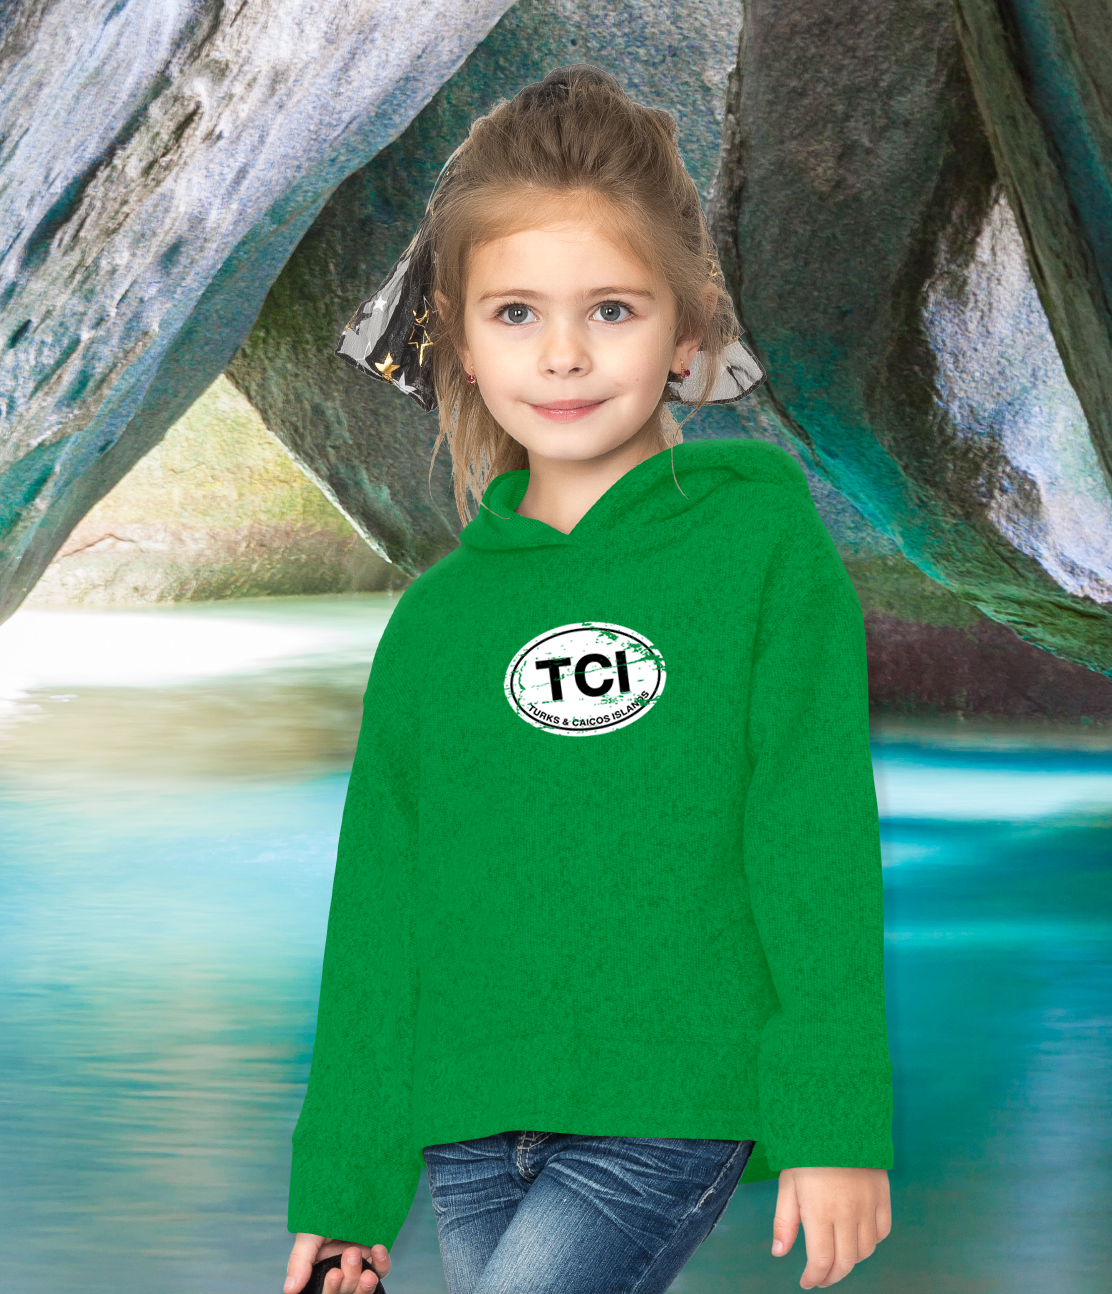 Turks & Caicos Classic Youth Hoodie - My Destination Location